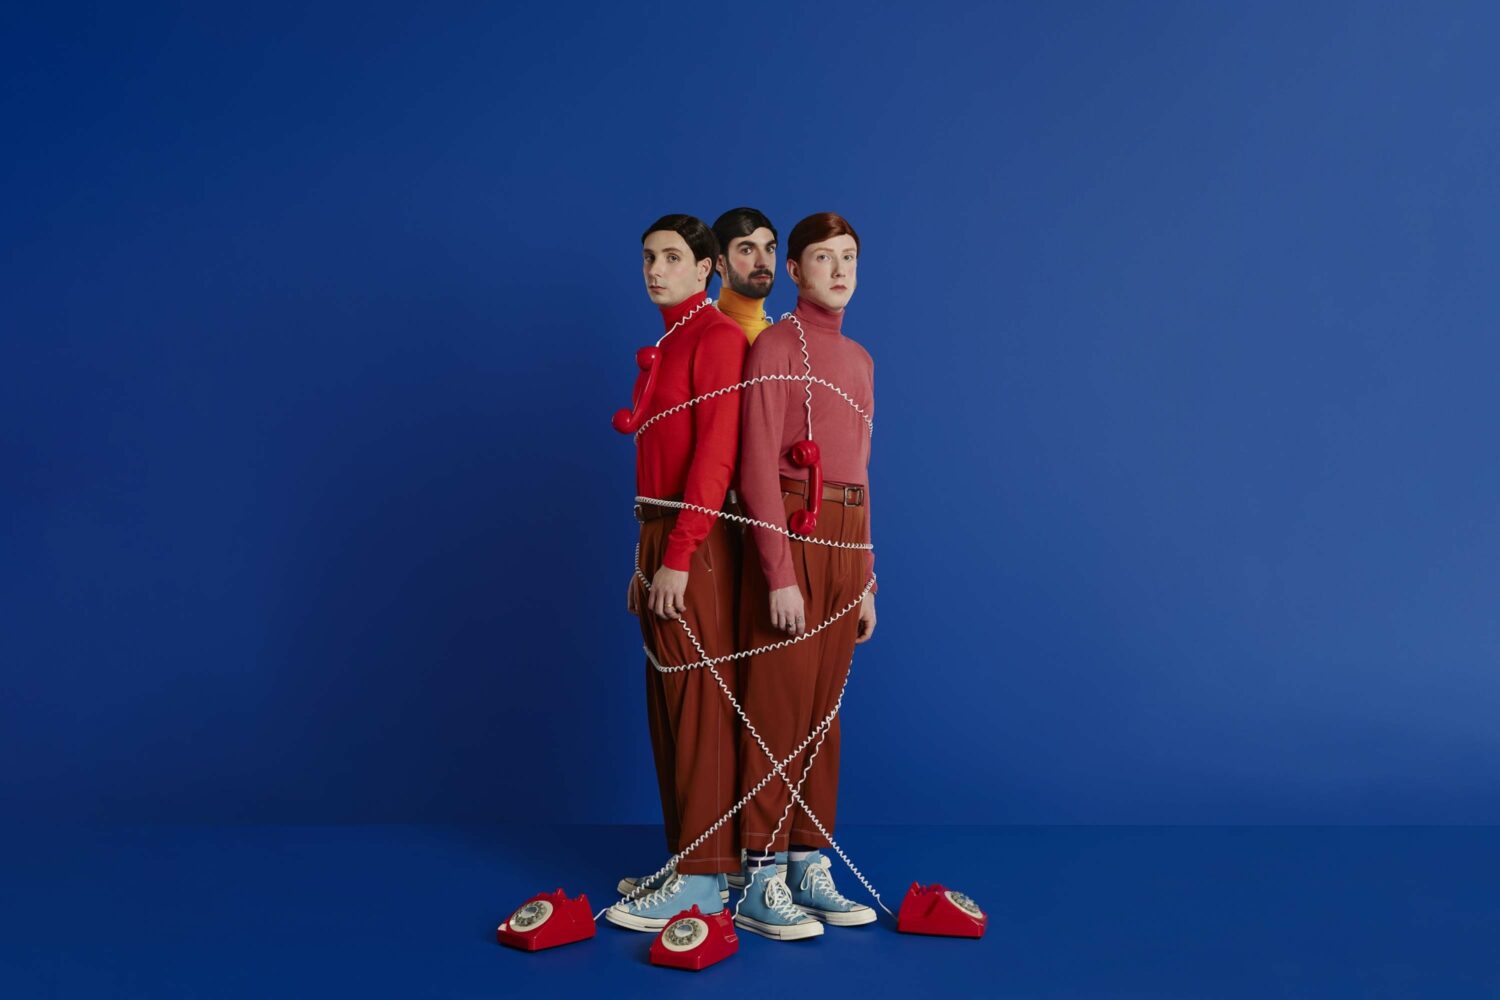 Two Door Cinema Club share new track 'Dirty Air'